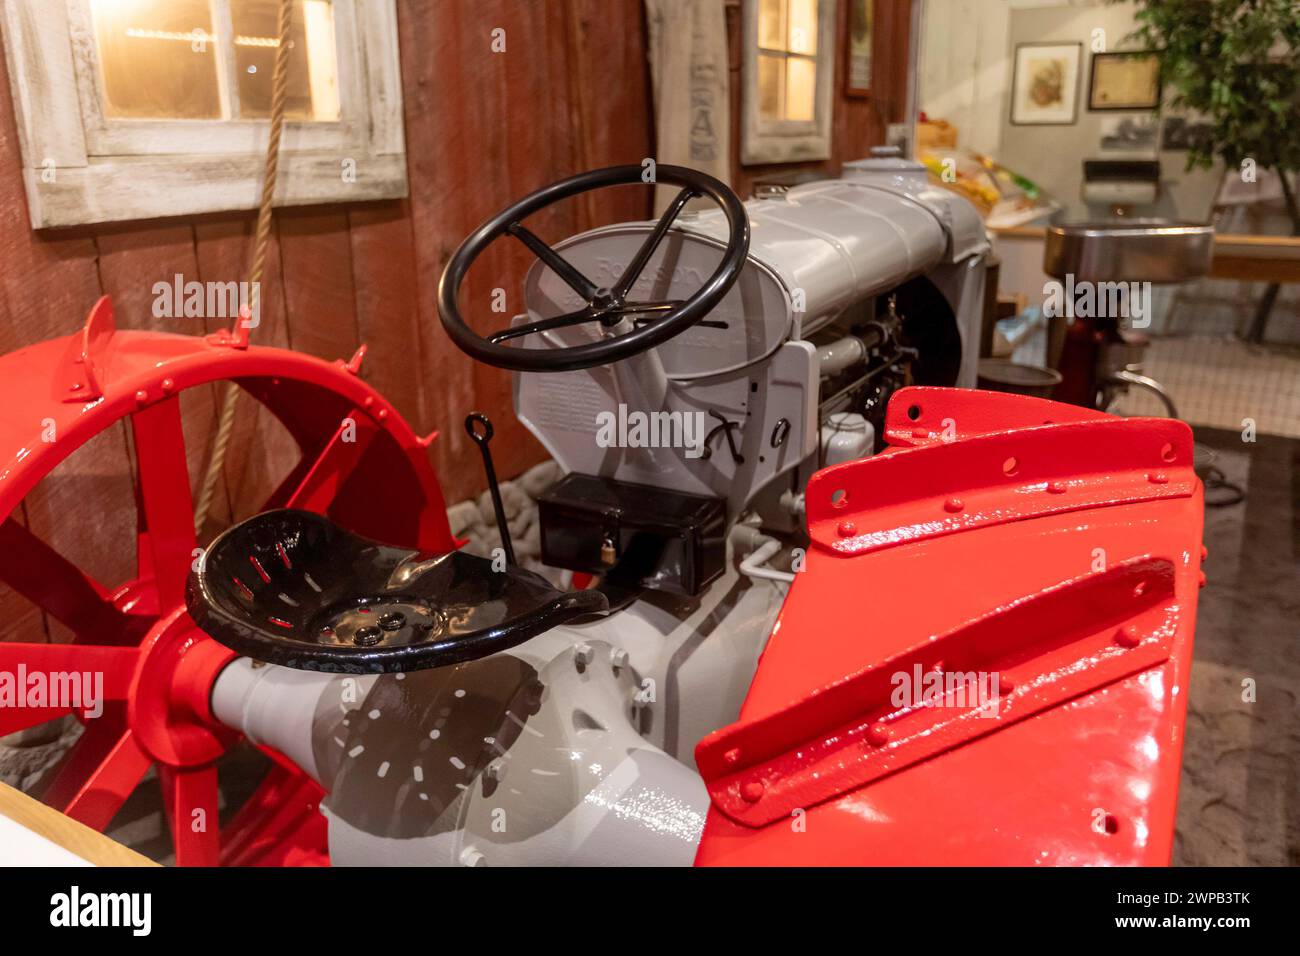 Lansing, Michigan - The Michigan History Museum. A Fordson tractor, made by Ford, is on display. Stock Photo